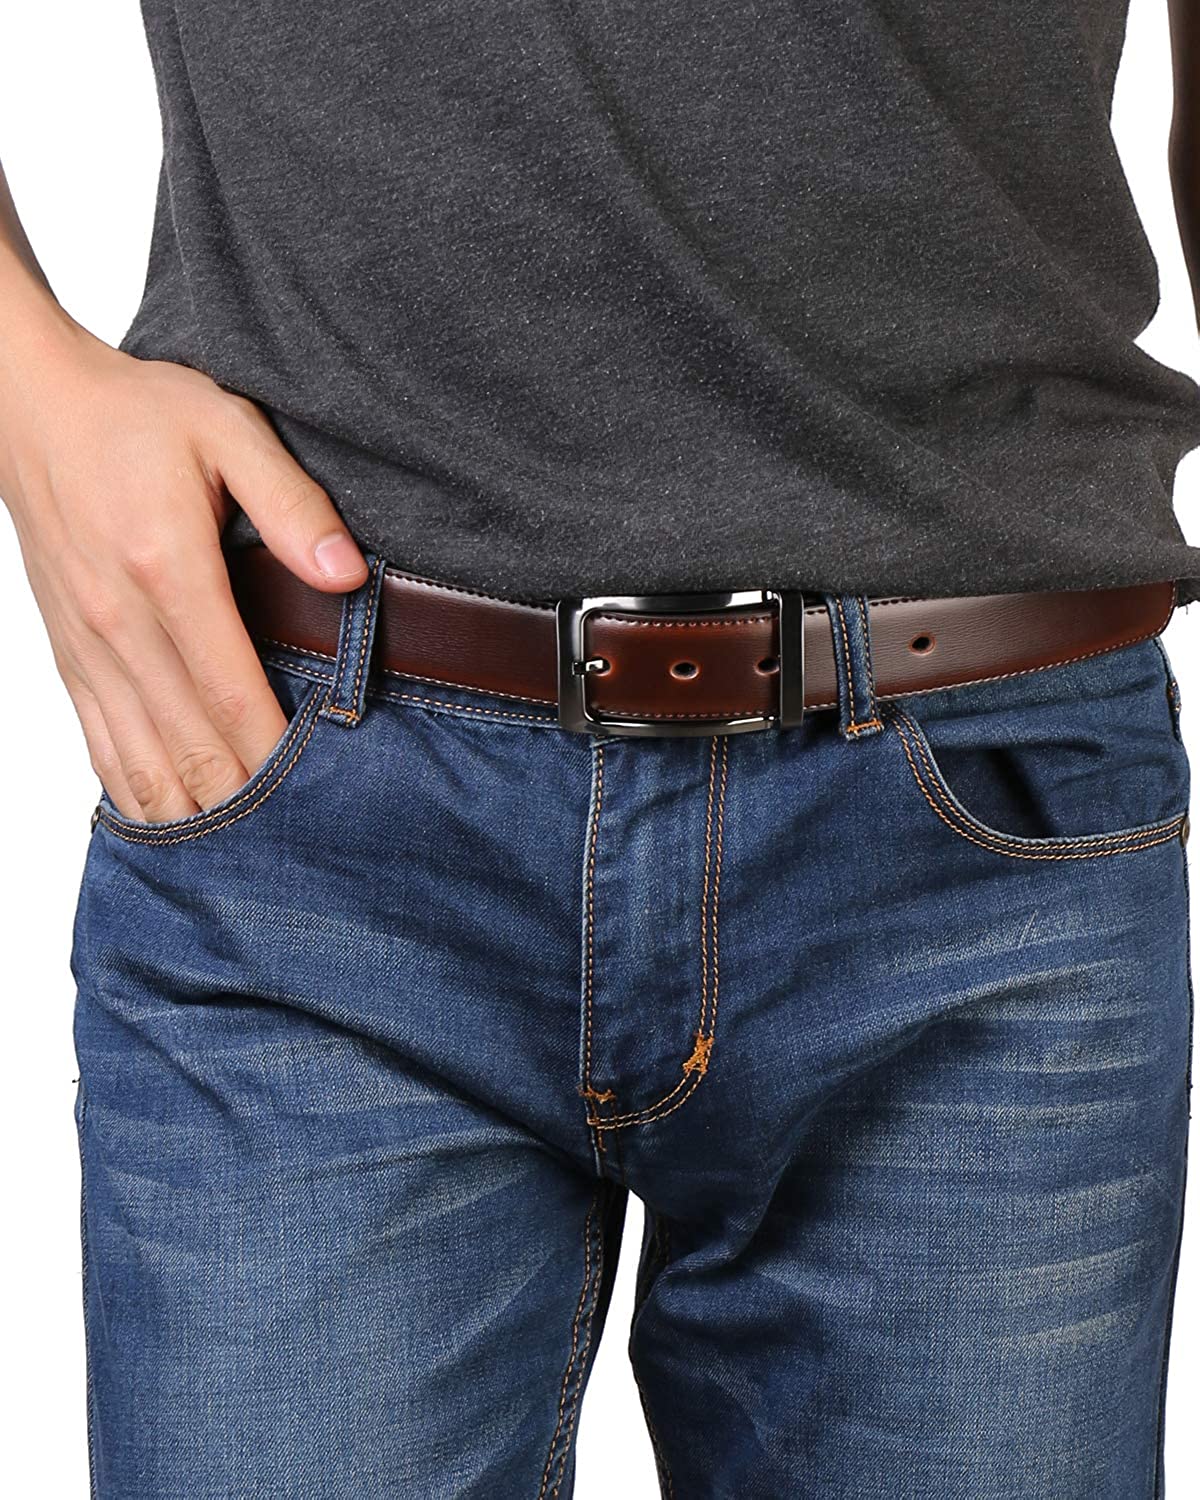 Genuine Leather Dress Belt For Men - Mens Belts For Suits, Jeans, Uniform  With Single Prong Buckle - Designed in the USA - Gifts For Men : Amazon.in:  Fashion